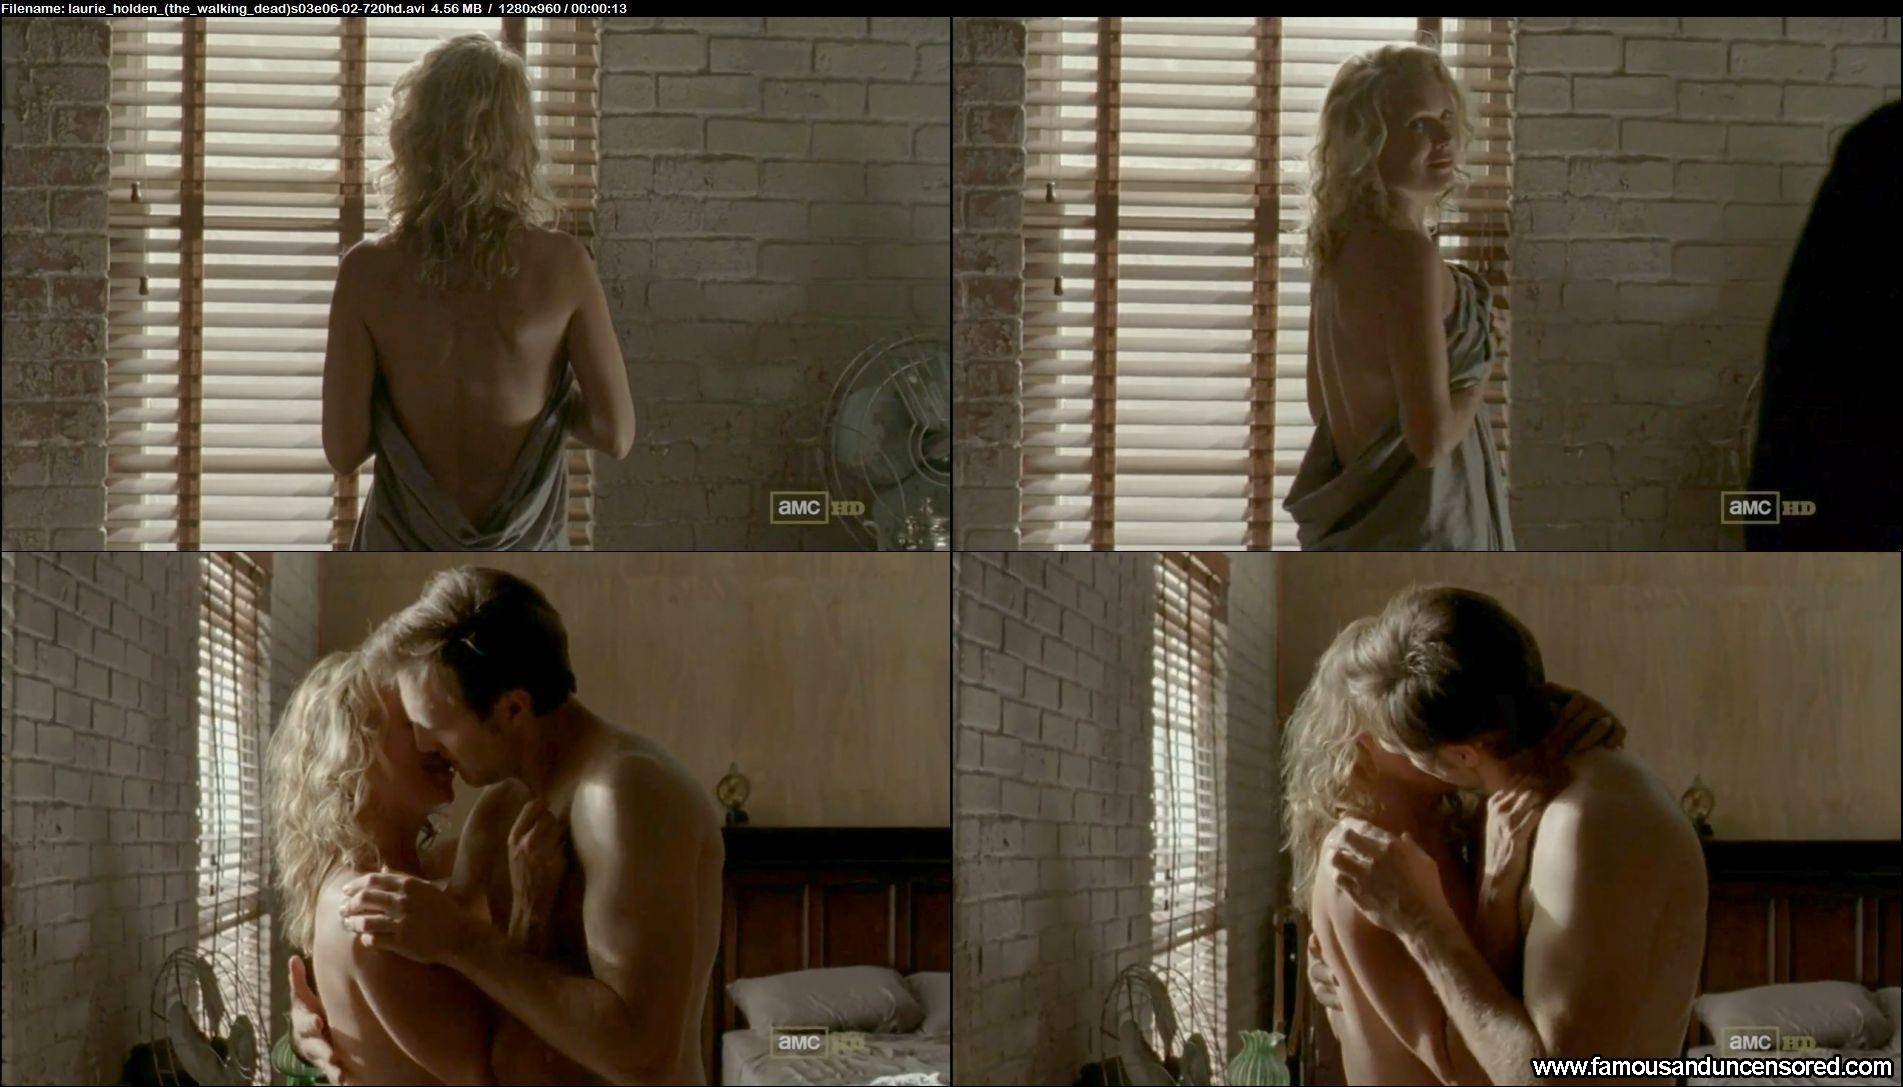 Laurie holden hot pics